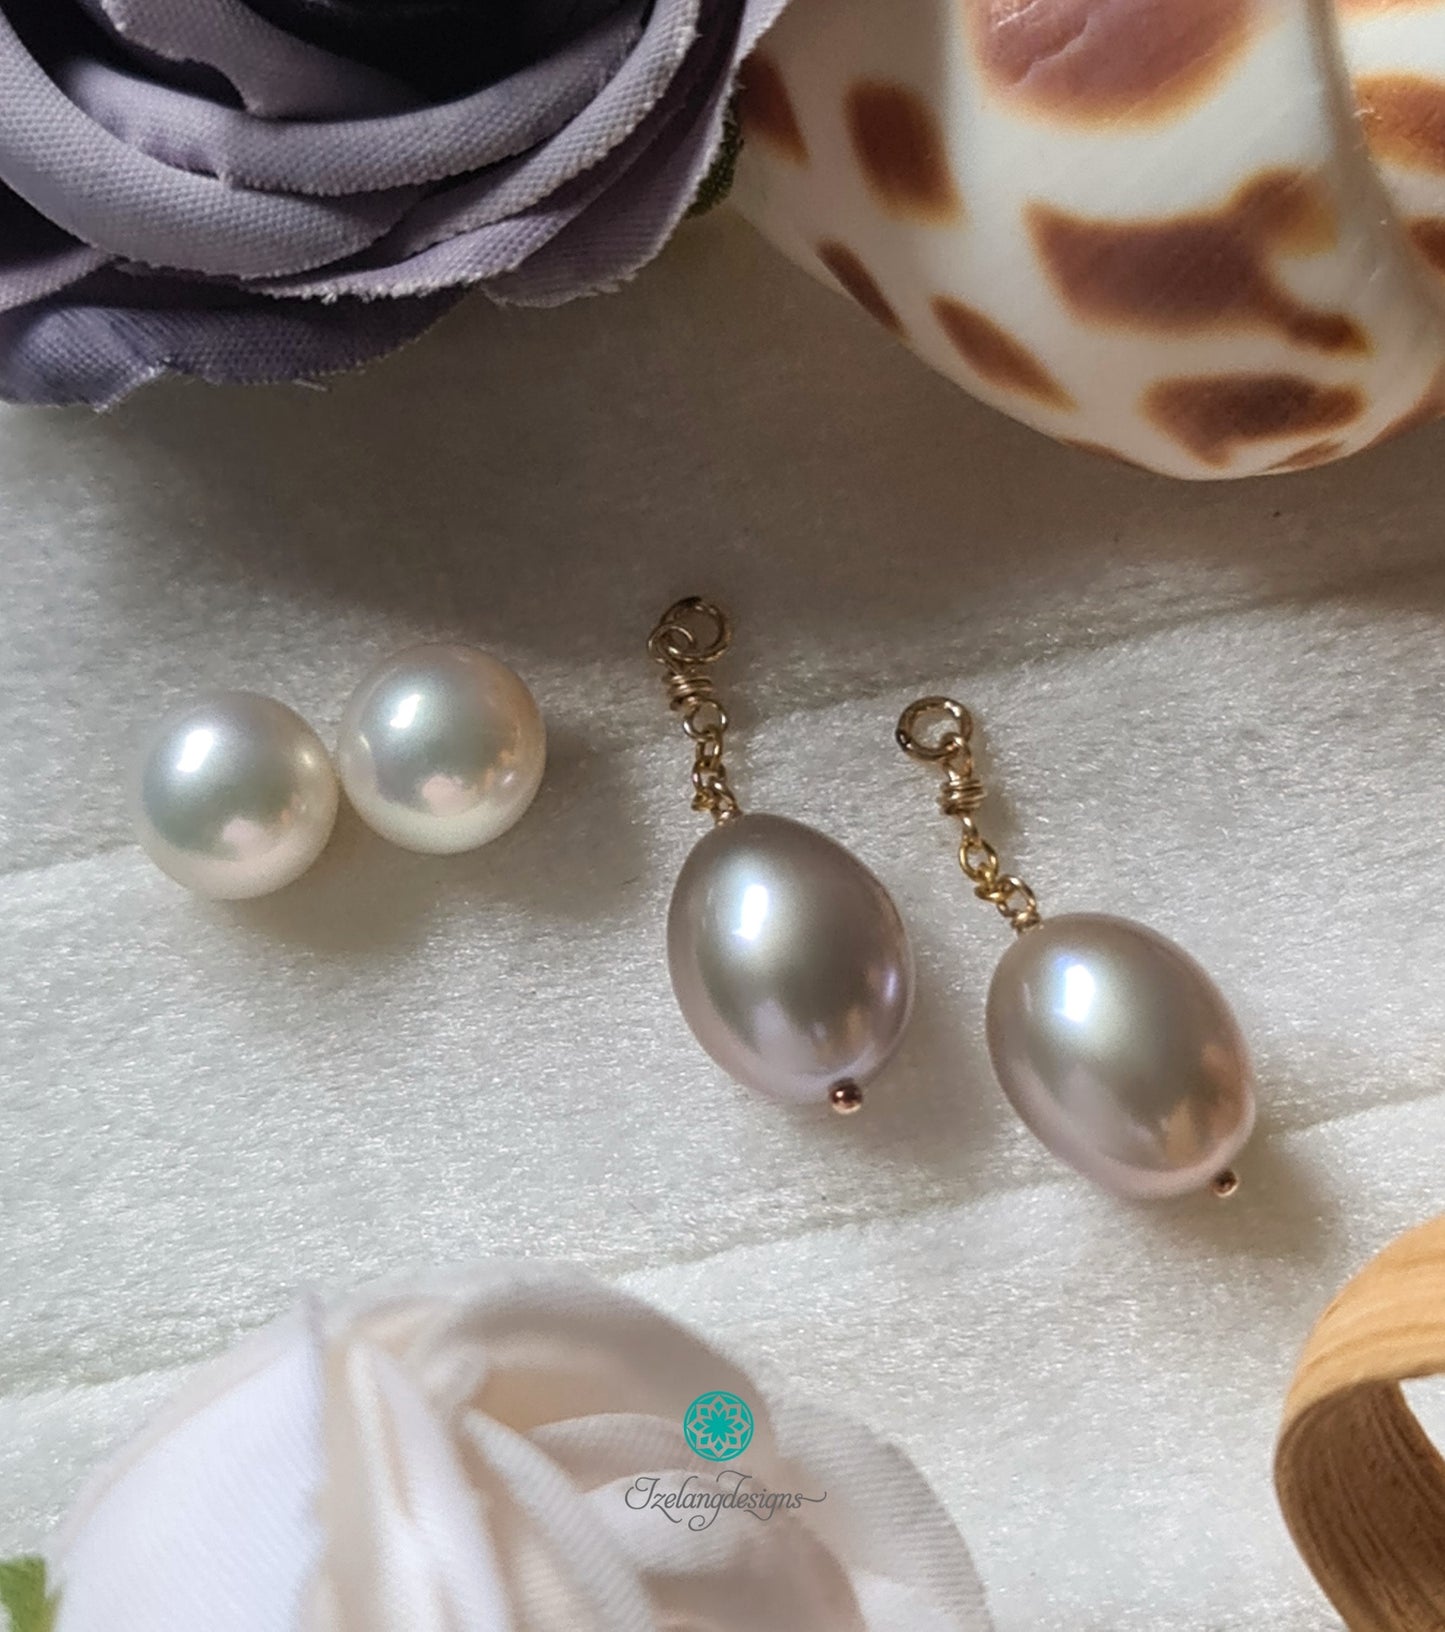 7-8mm White Akoya Round Pearls with 9-10mm Purple Grey Freshwater Pearls Rice Shaped Detachable Drops-EG433